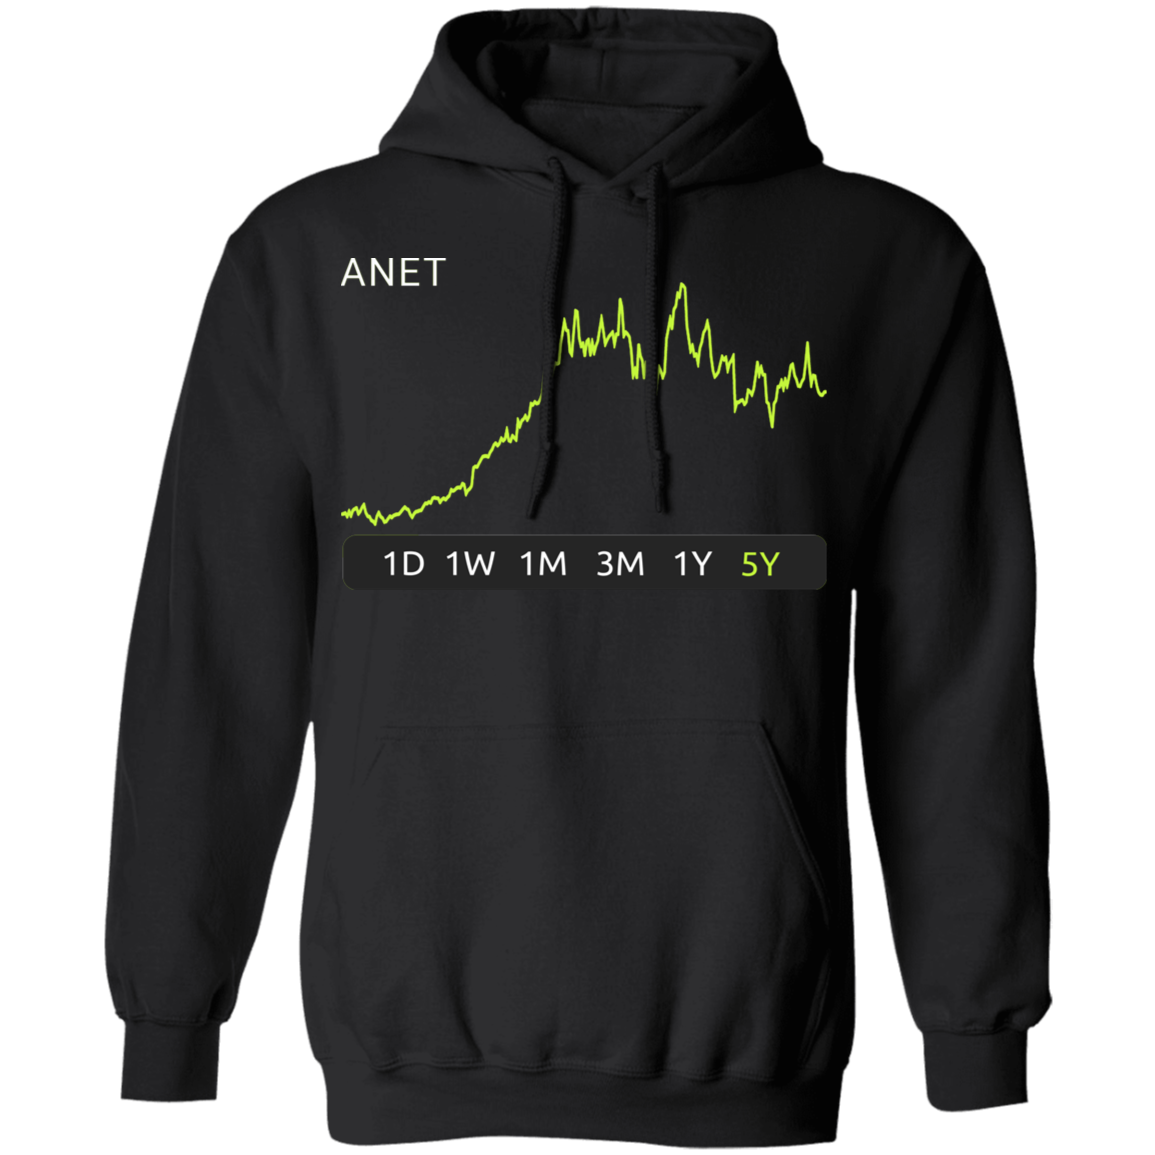 ANET Stock 5y Pullover Hoodie